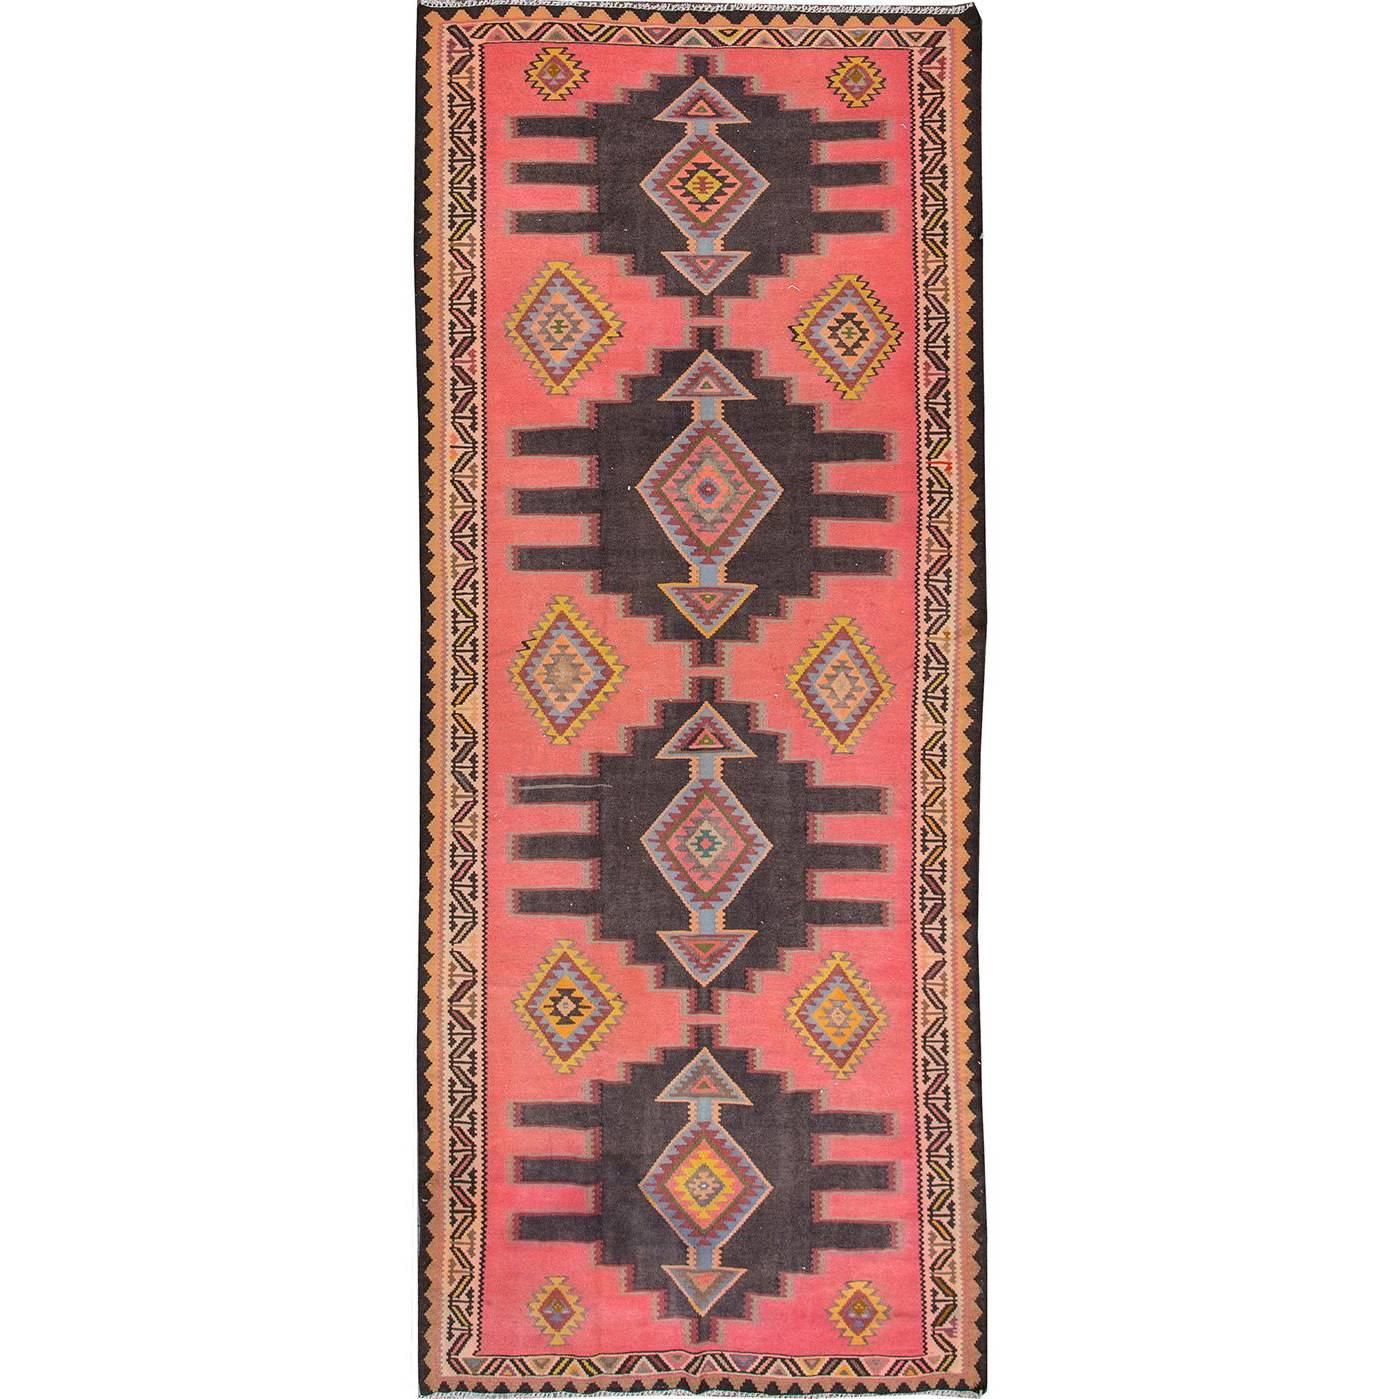 Gorgeously Contrasted Persian Kilim Rug